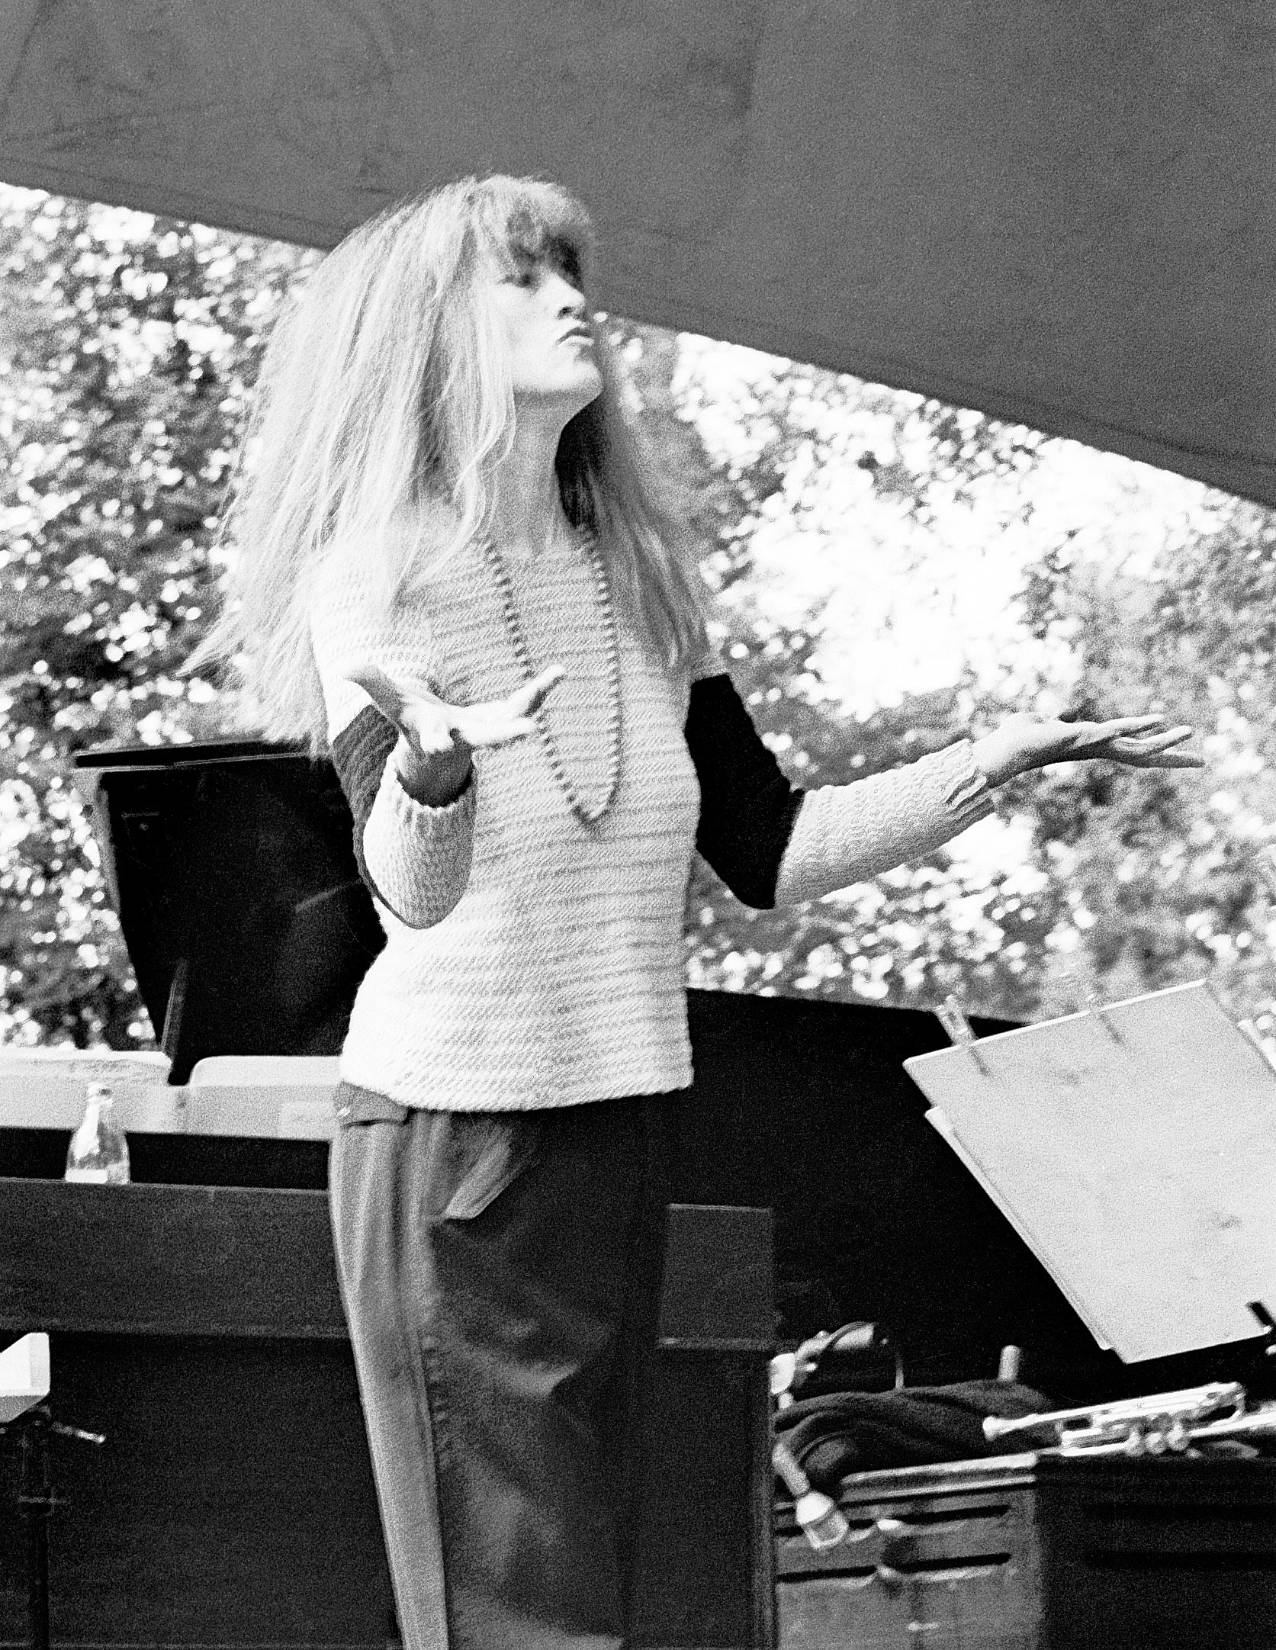 Carla Bley conducts her band at the Pori Jazz Festival in Finland, July 1978